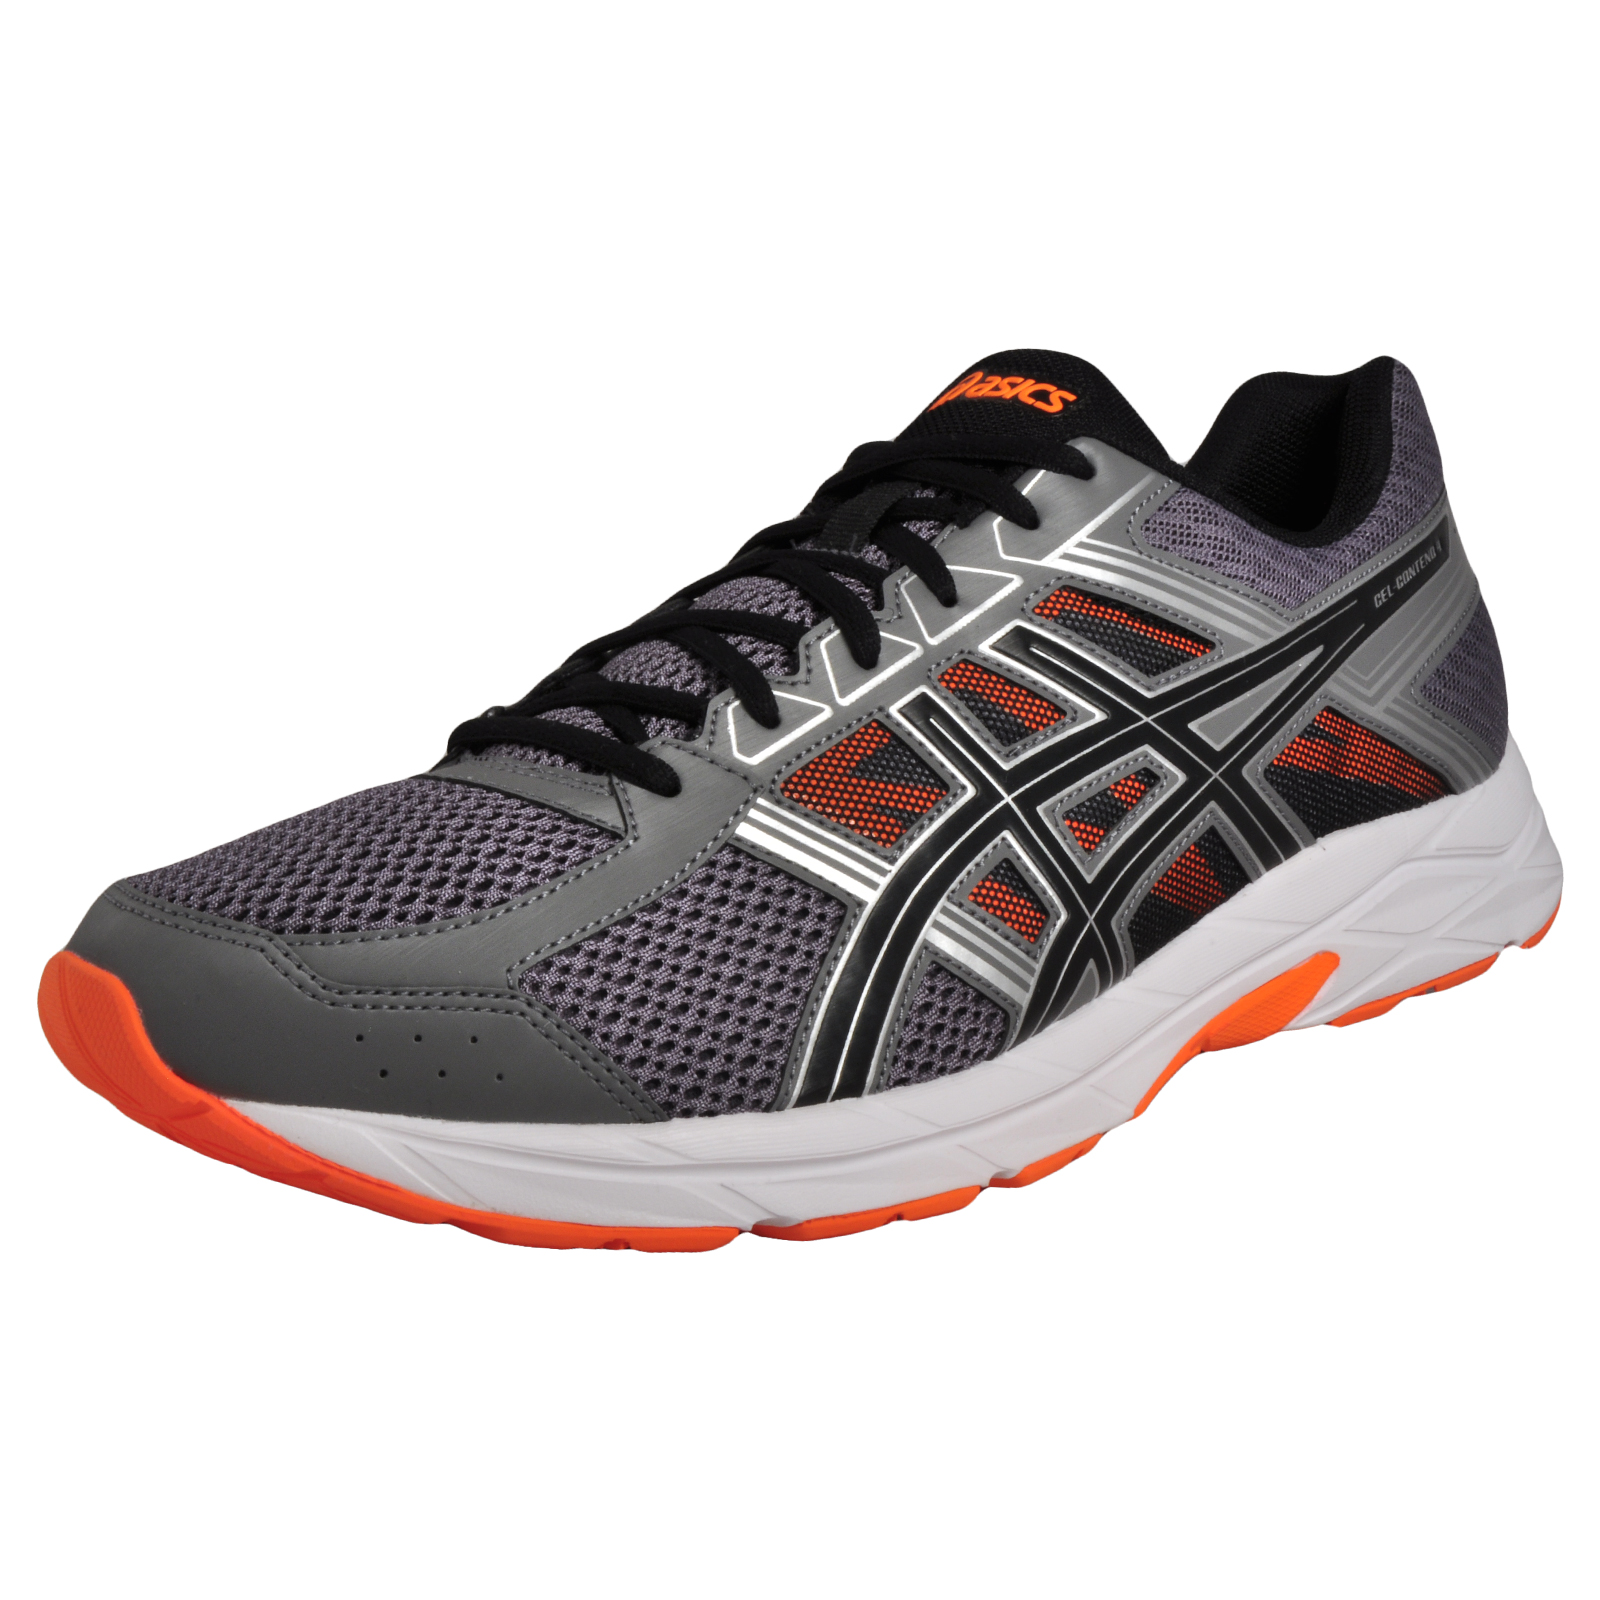 Asics Gel Contend 4 Men's Premium Running Shoes Fitness Gym Trainers ...